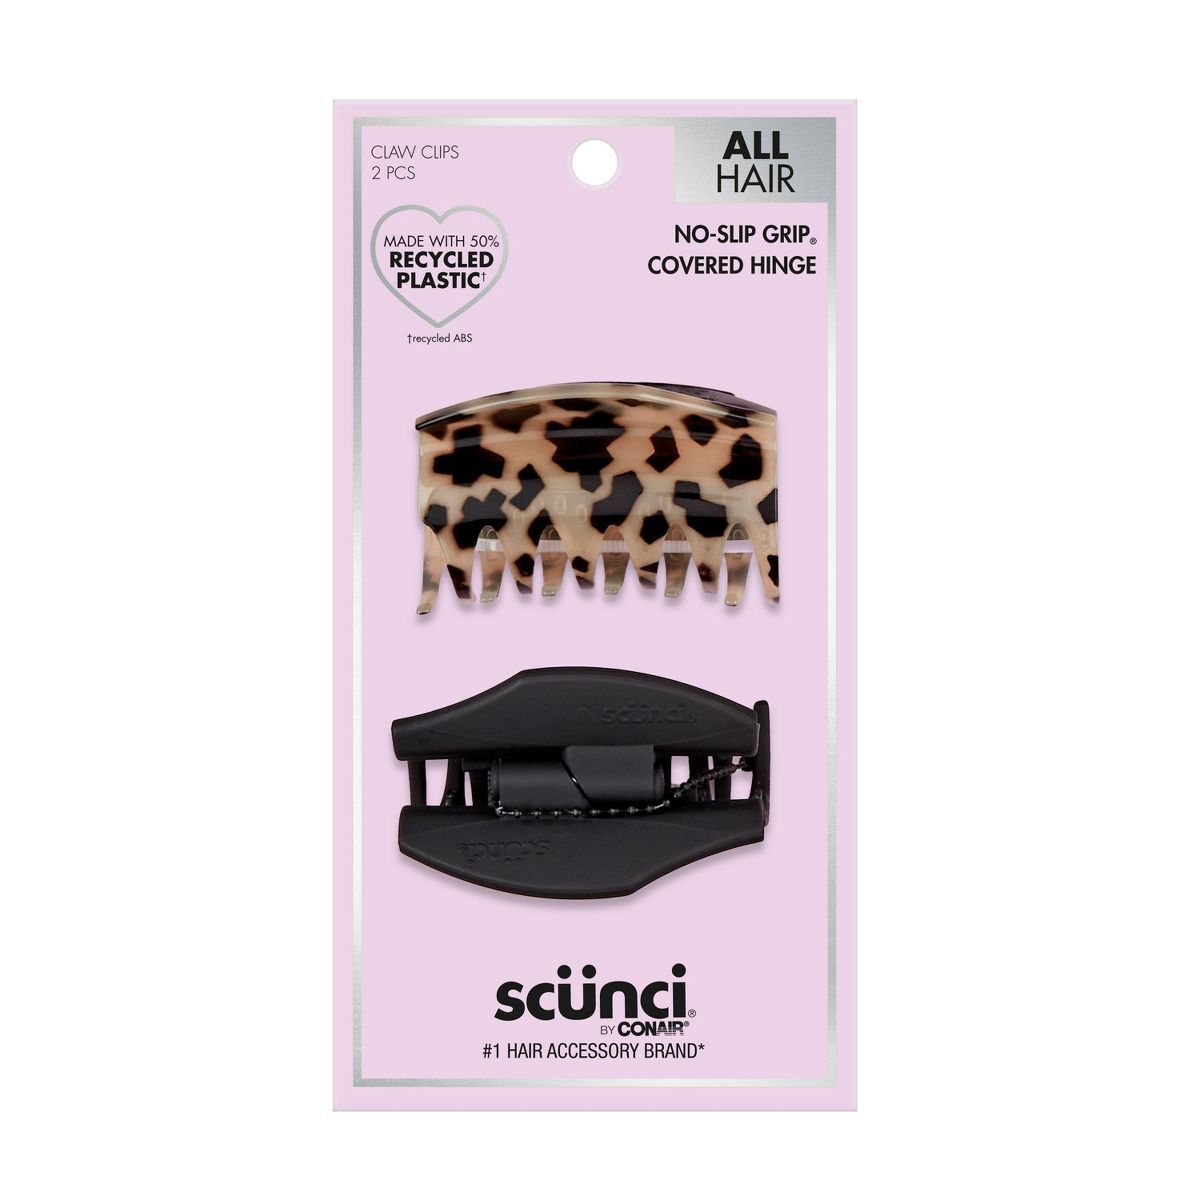 scünci No-Slip Grip Recycled Covered Hinge Claw Clips - Matte Black/Tortoise - All Hair - 2pk | Target